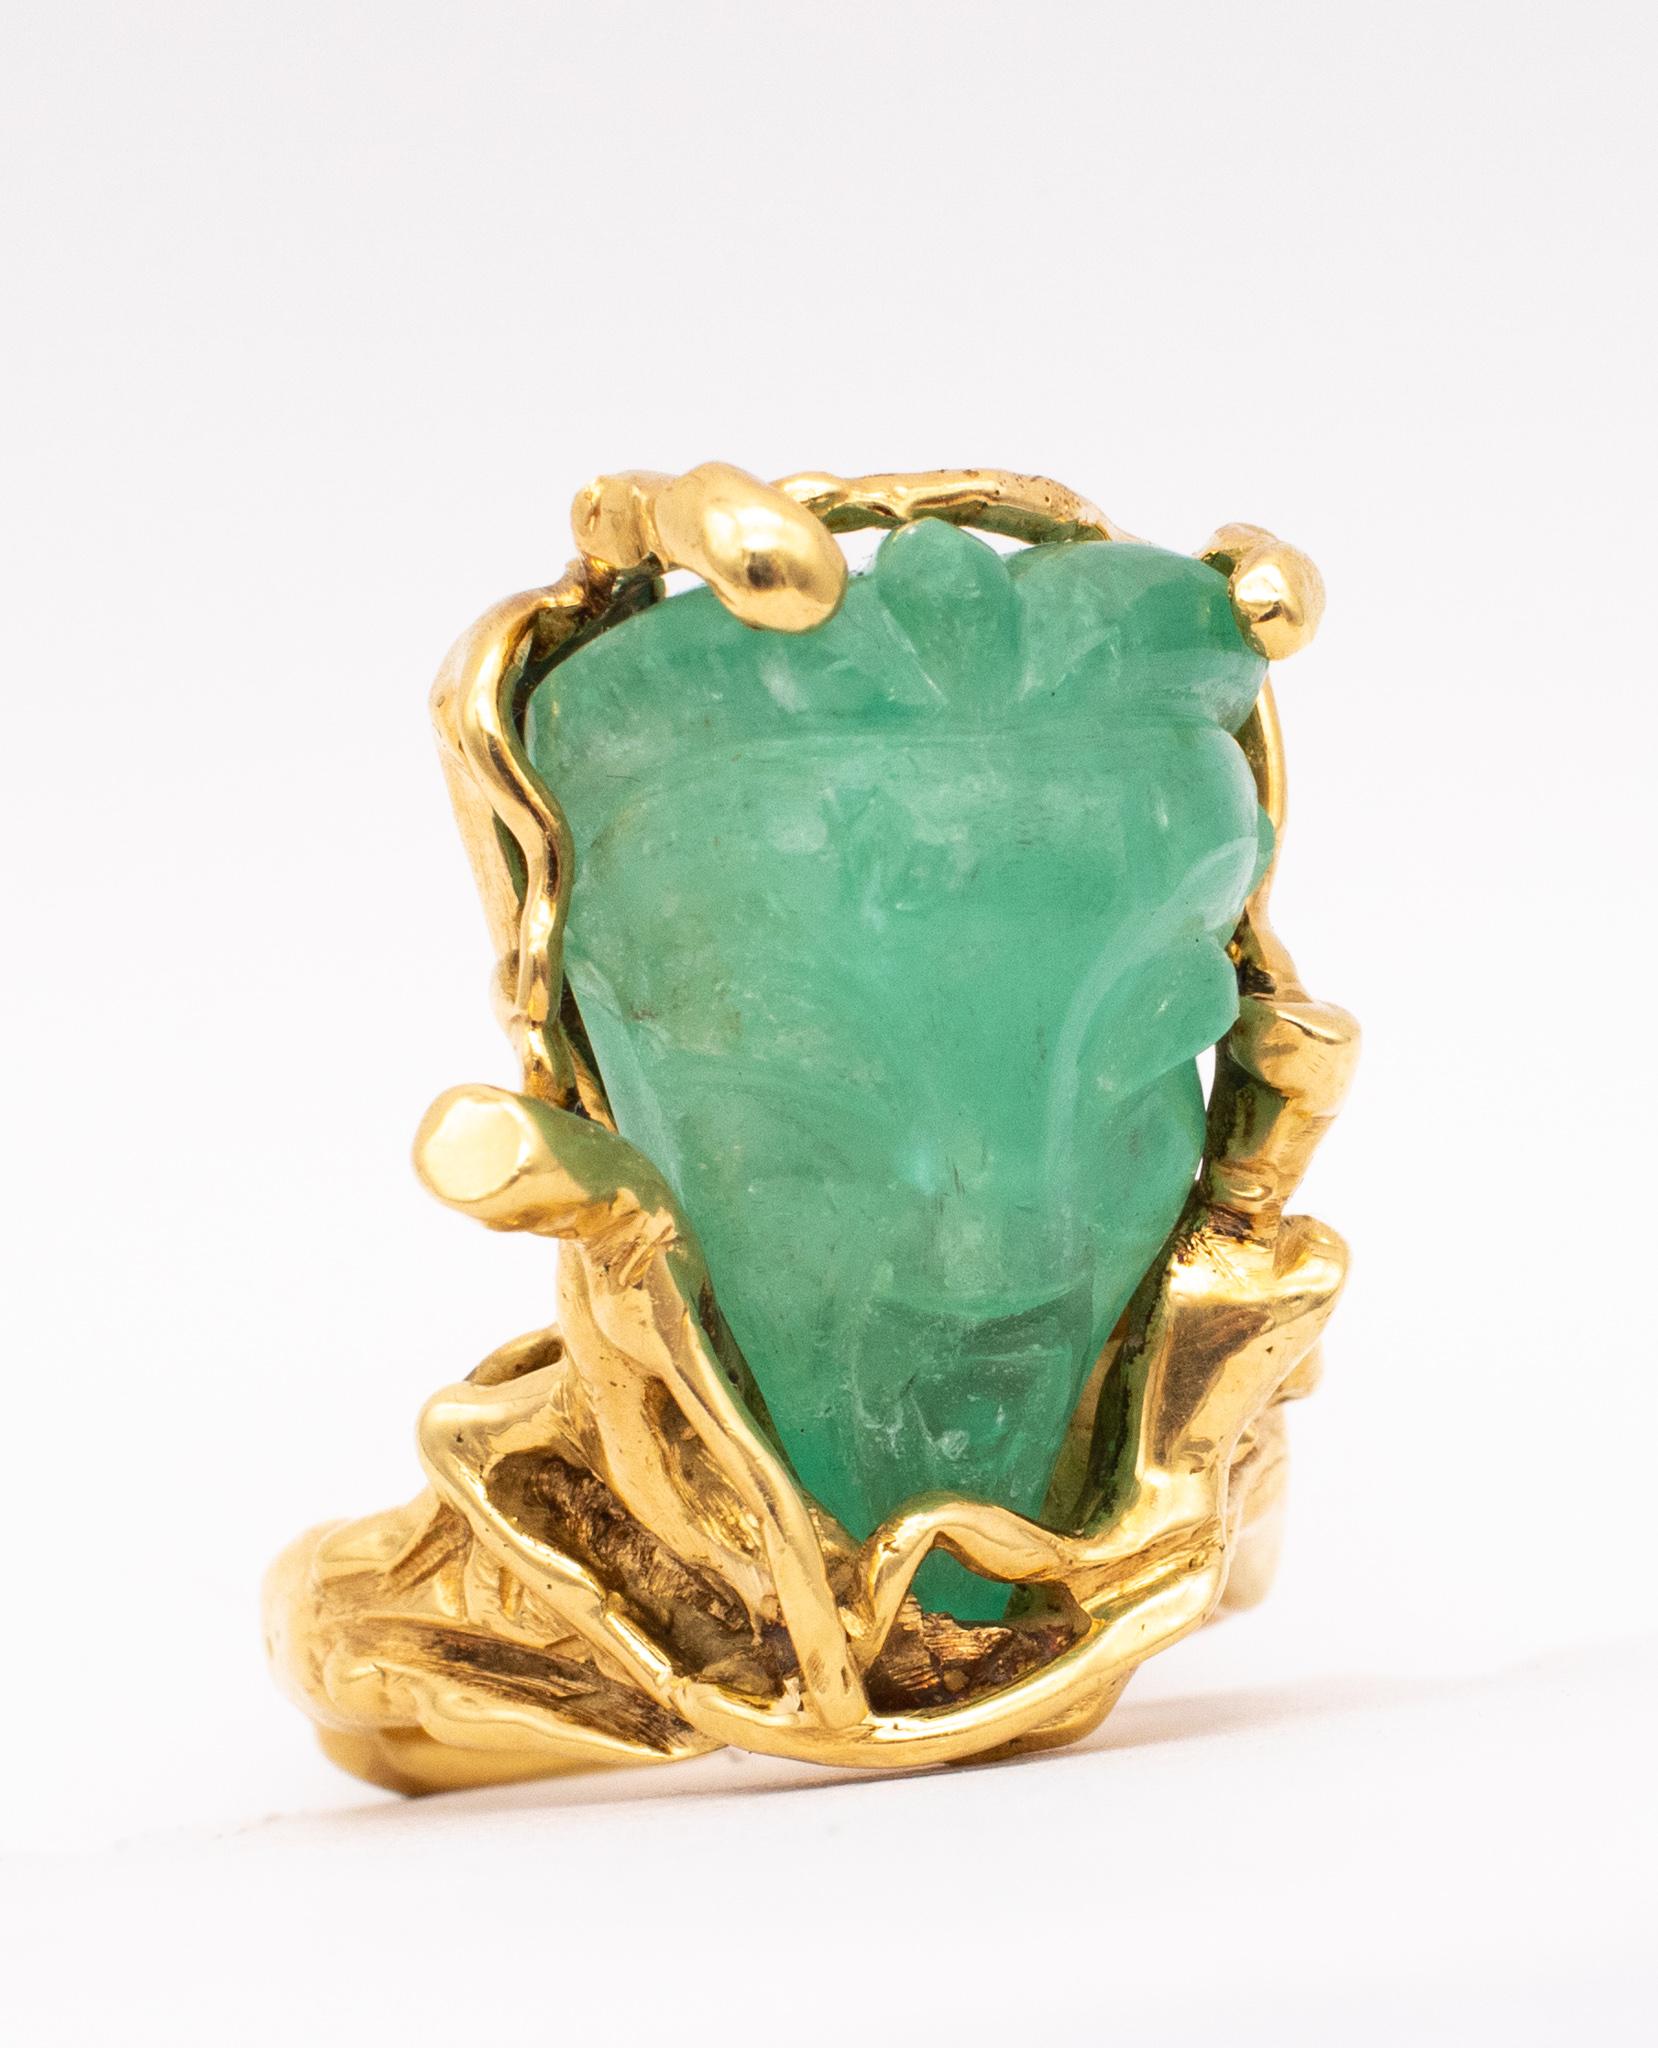 Eric De Kolb 1960 Rare Statement Ring in 18Kt Gold with 28.53 Cts Carved Emerald 4